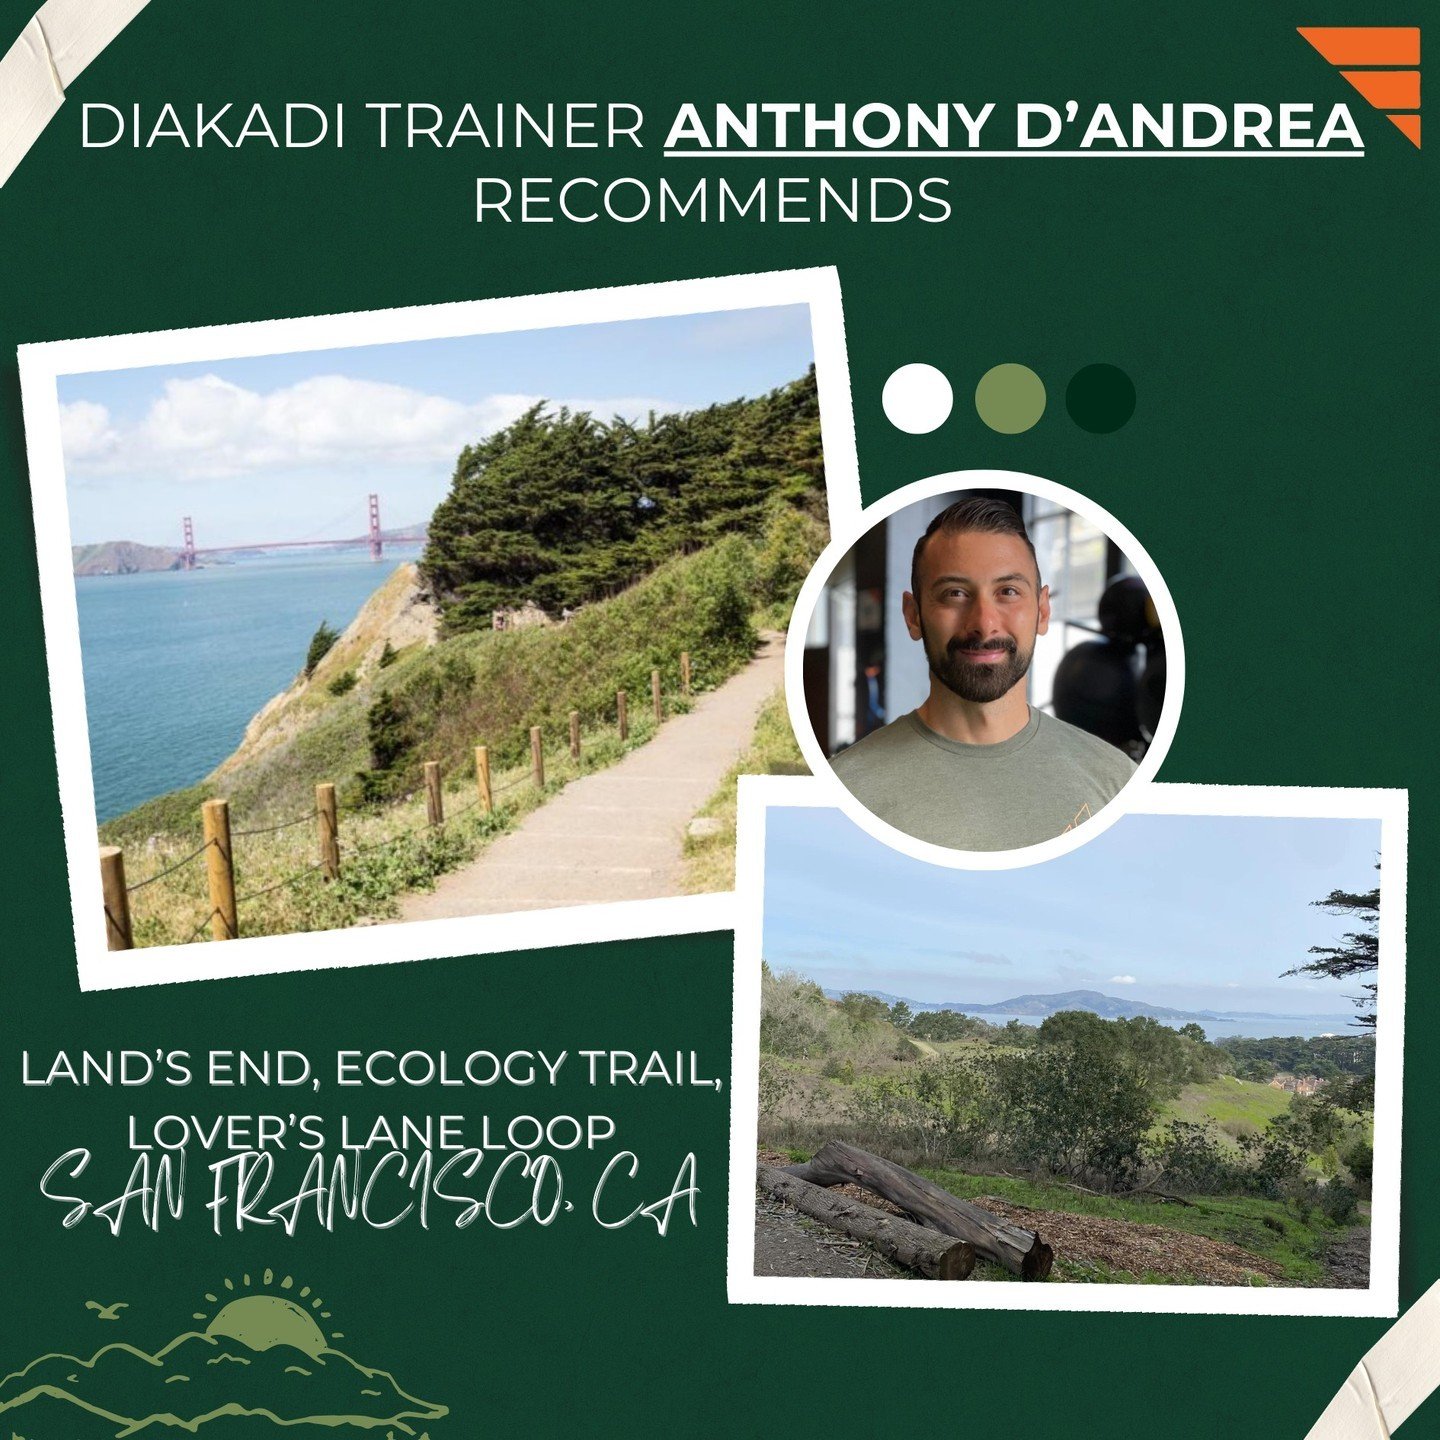 Looking to get a little outdoor activity in after being cooped up in your home or office all week? ⁠
⁠
Explore this incredible San Francisco trail recommended by our DIAKADI trainer Anthony D&rsquo;andrea!⁠
⁠
Lands&rsquo; End and the Presidio intertw